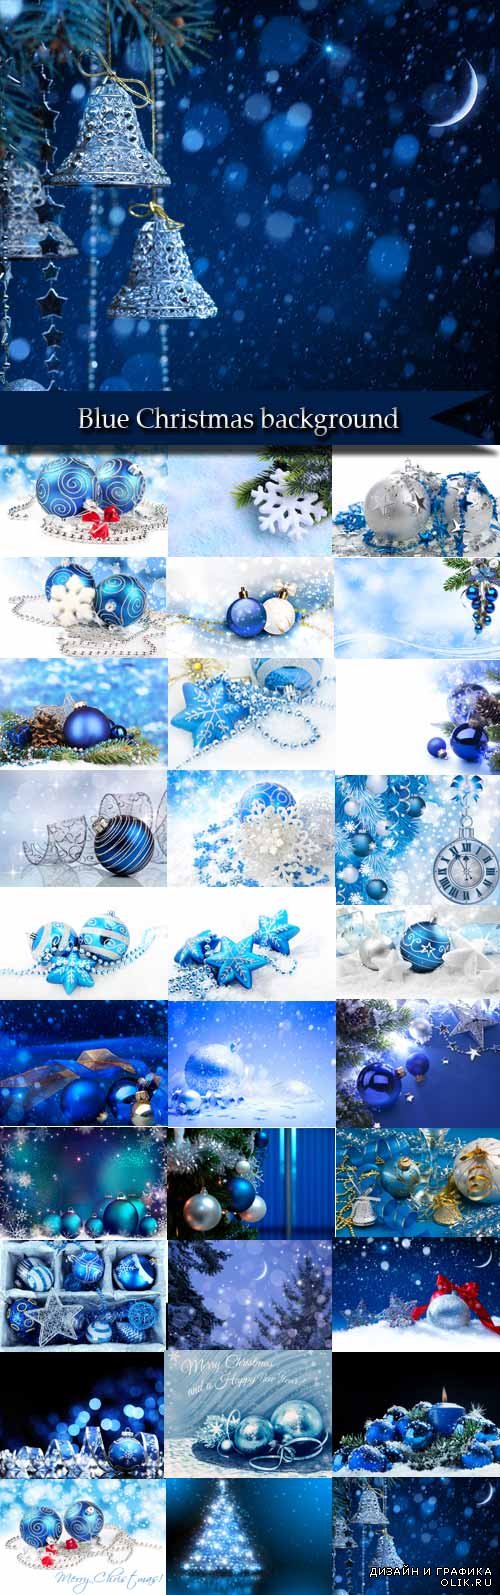 Blue Christmas backgrounds